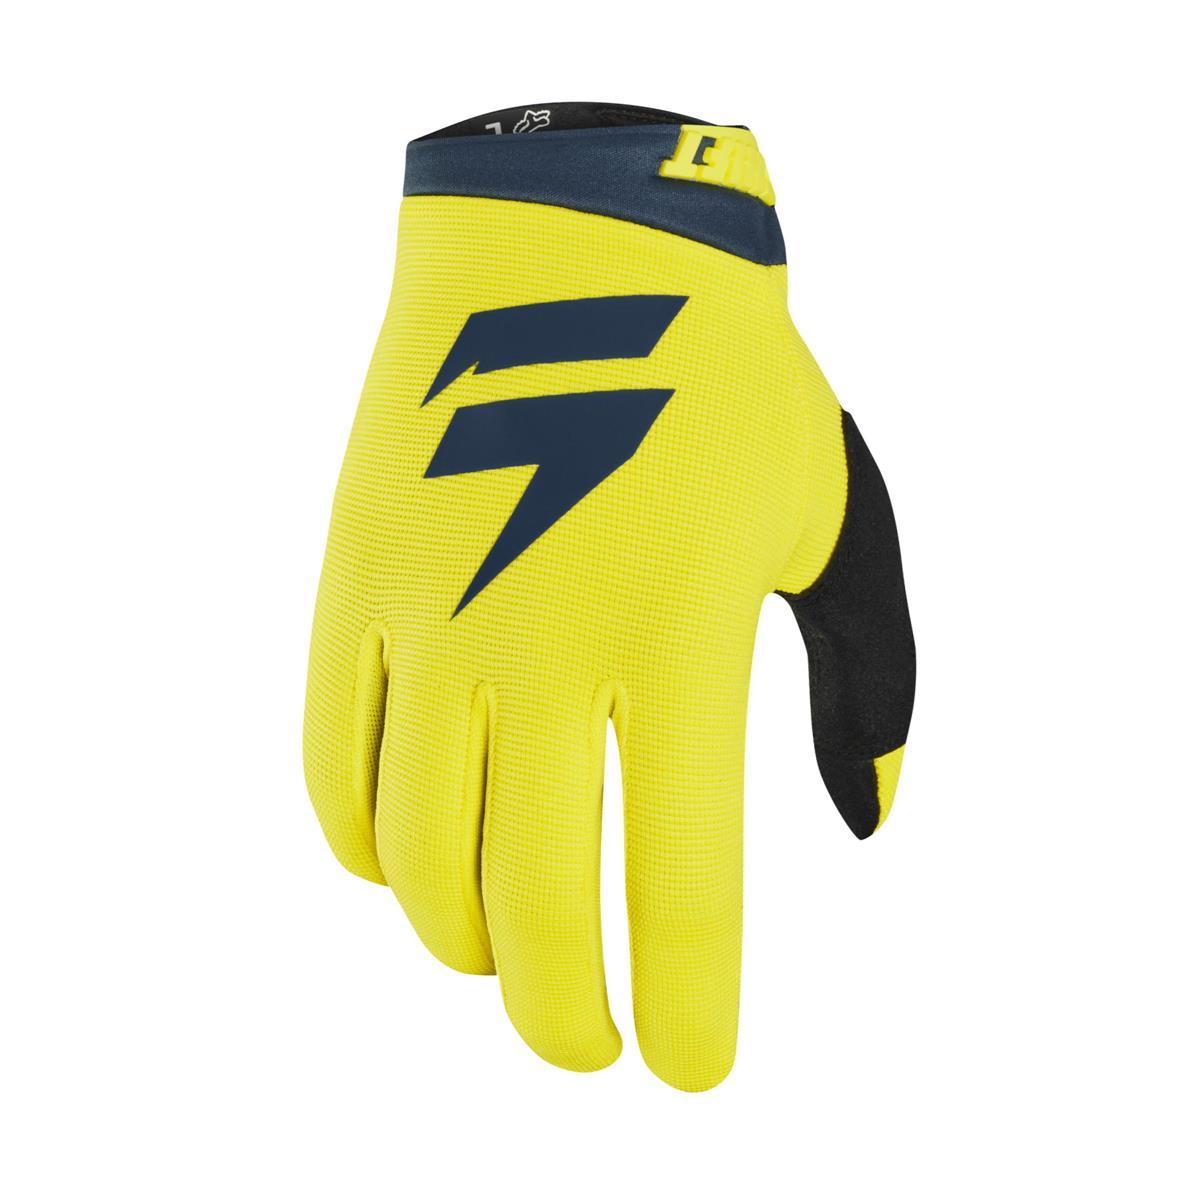 Shift Gloves Whit3 Label Air Yellow/Navy